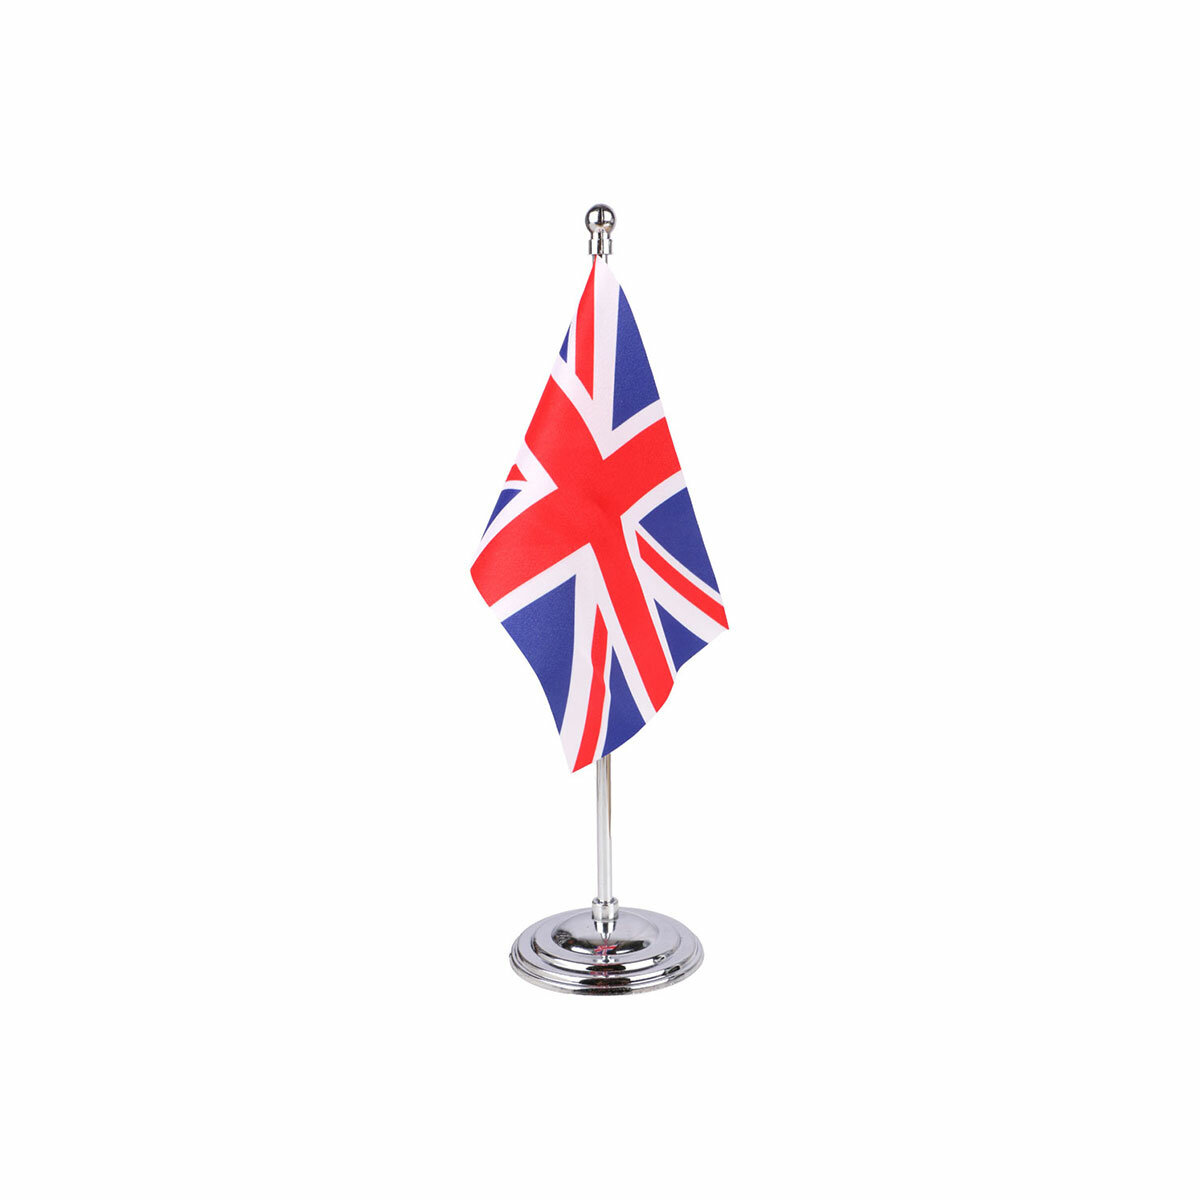 uk table or desk flag with a chrome plated plastic stand / base